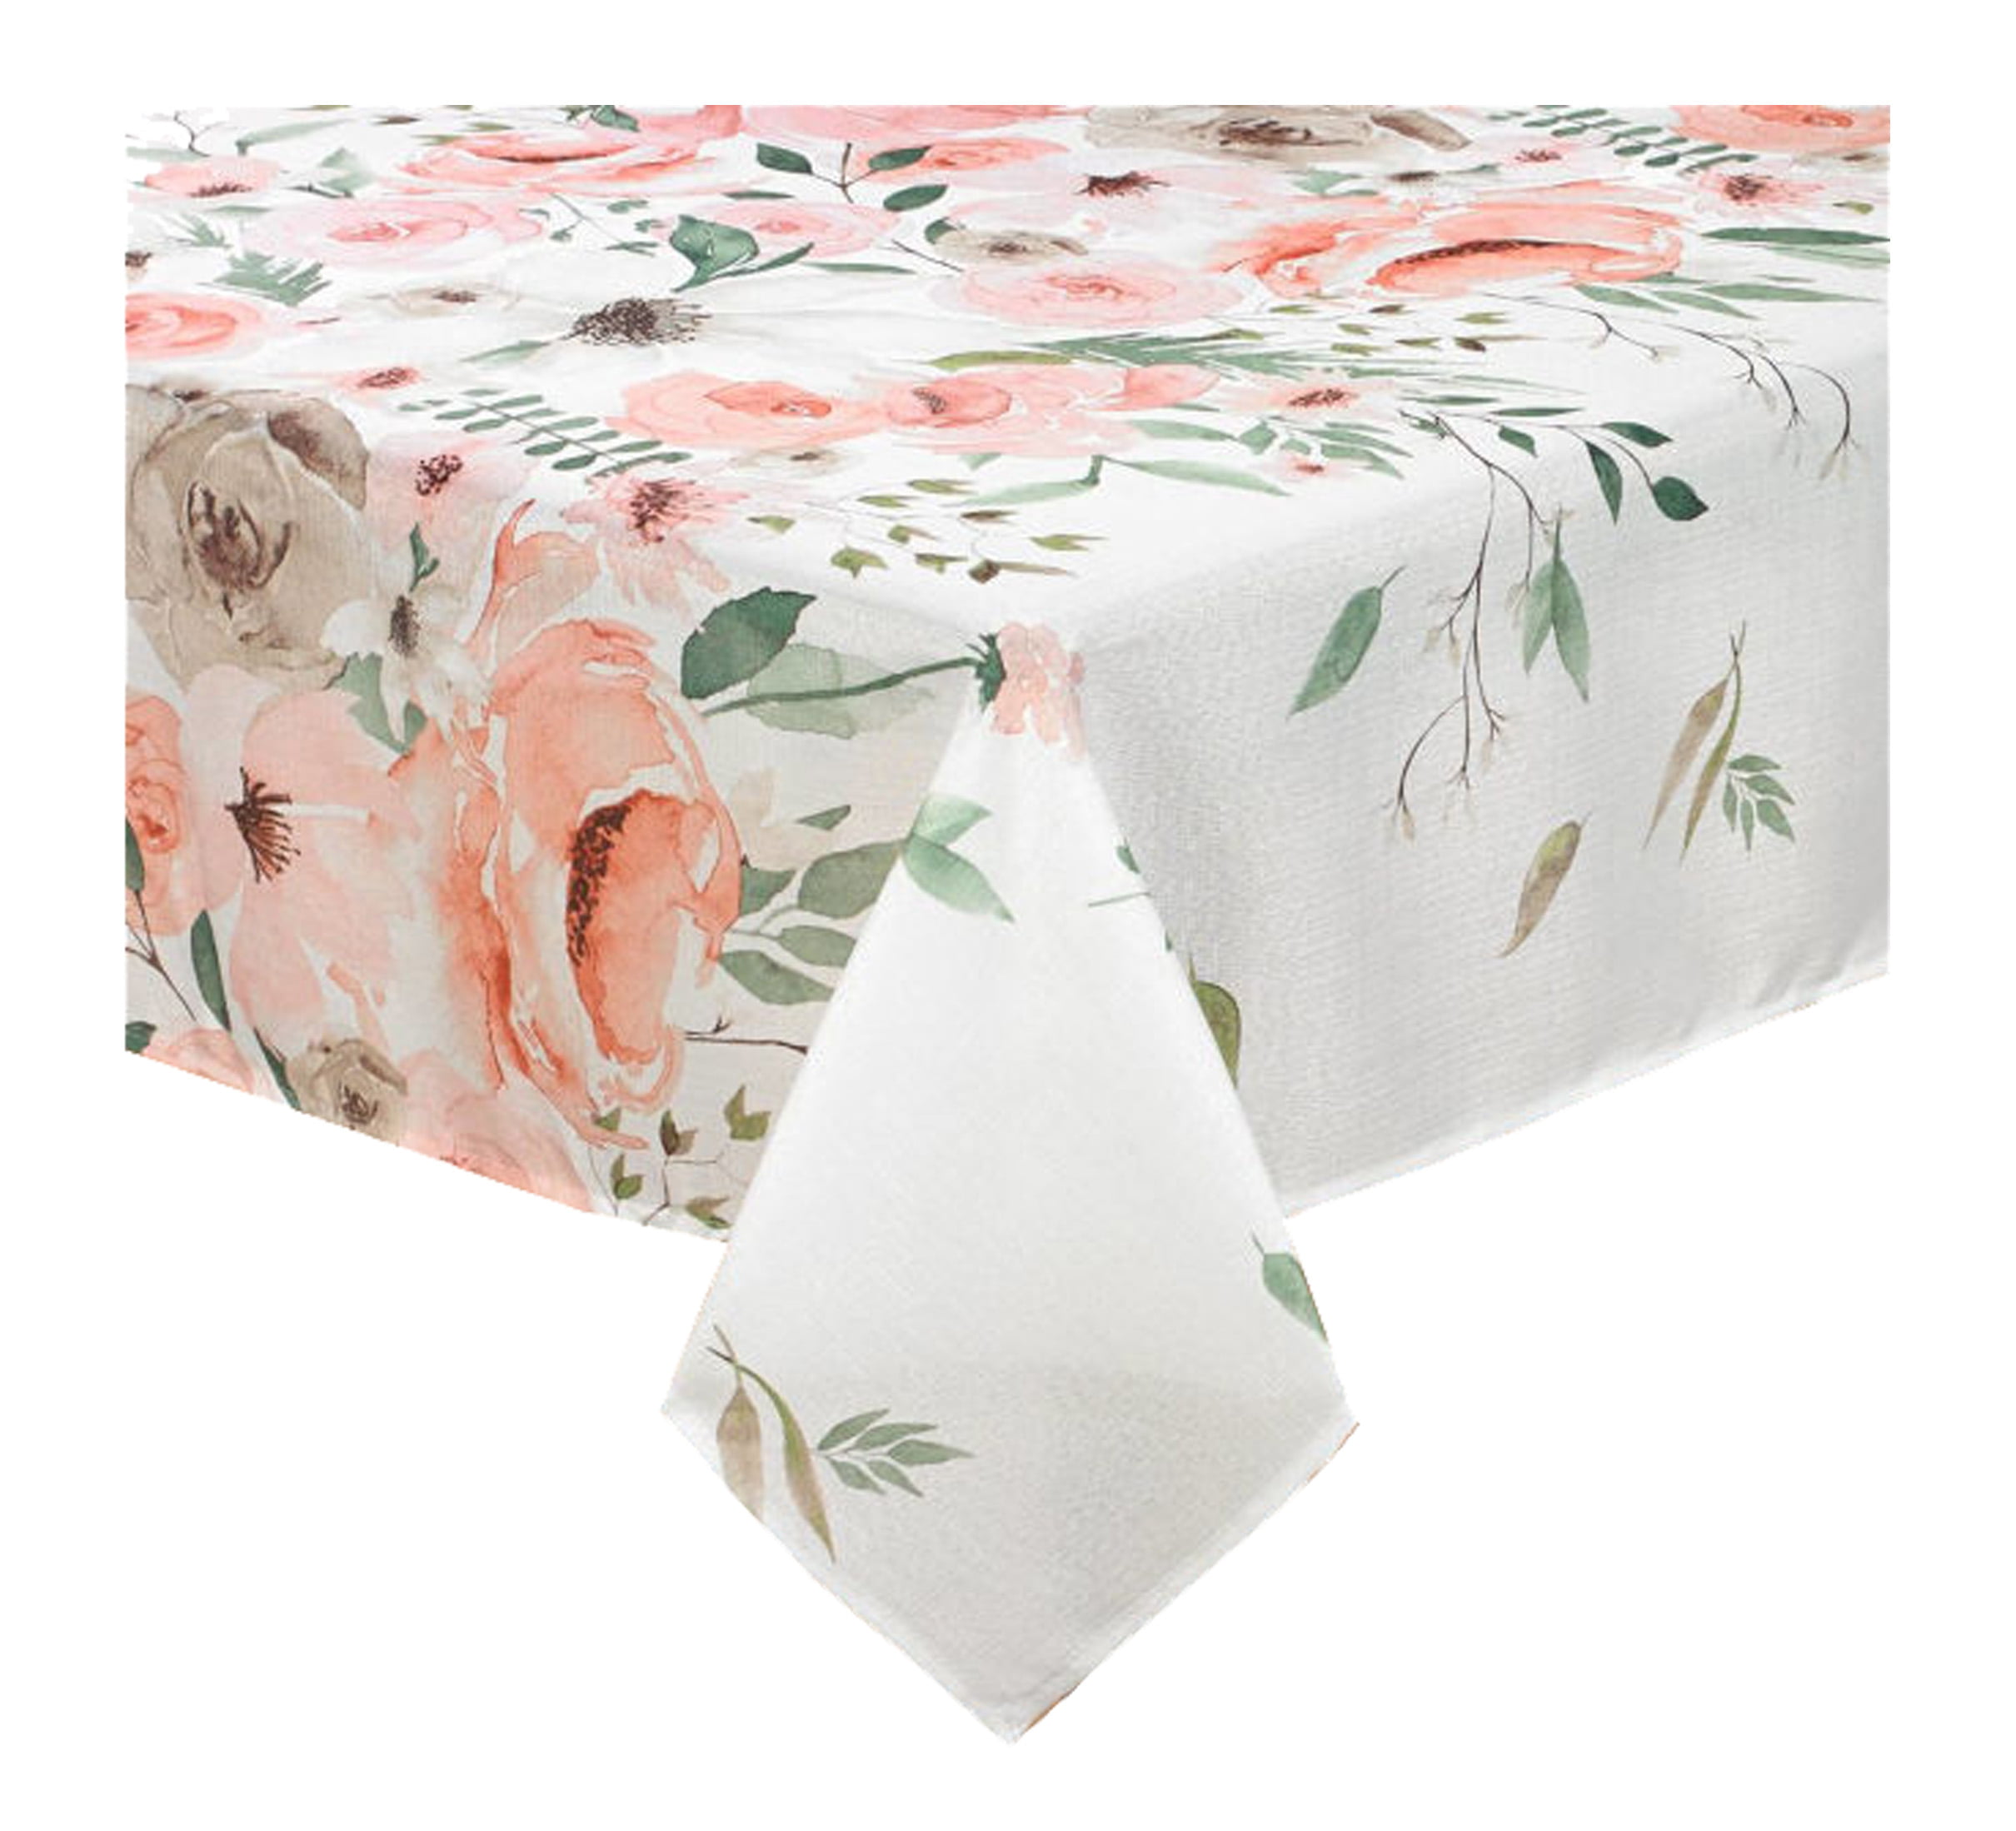 and Banquet Sizes Spring Flower Printed Fabric Tablecloth: Assorted Square Round 60 Inch x 84 Inch 